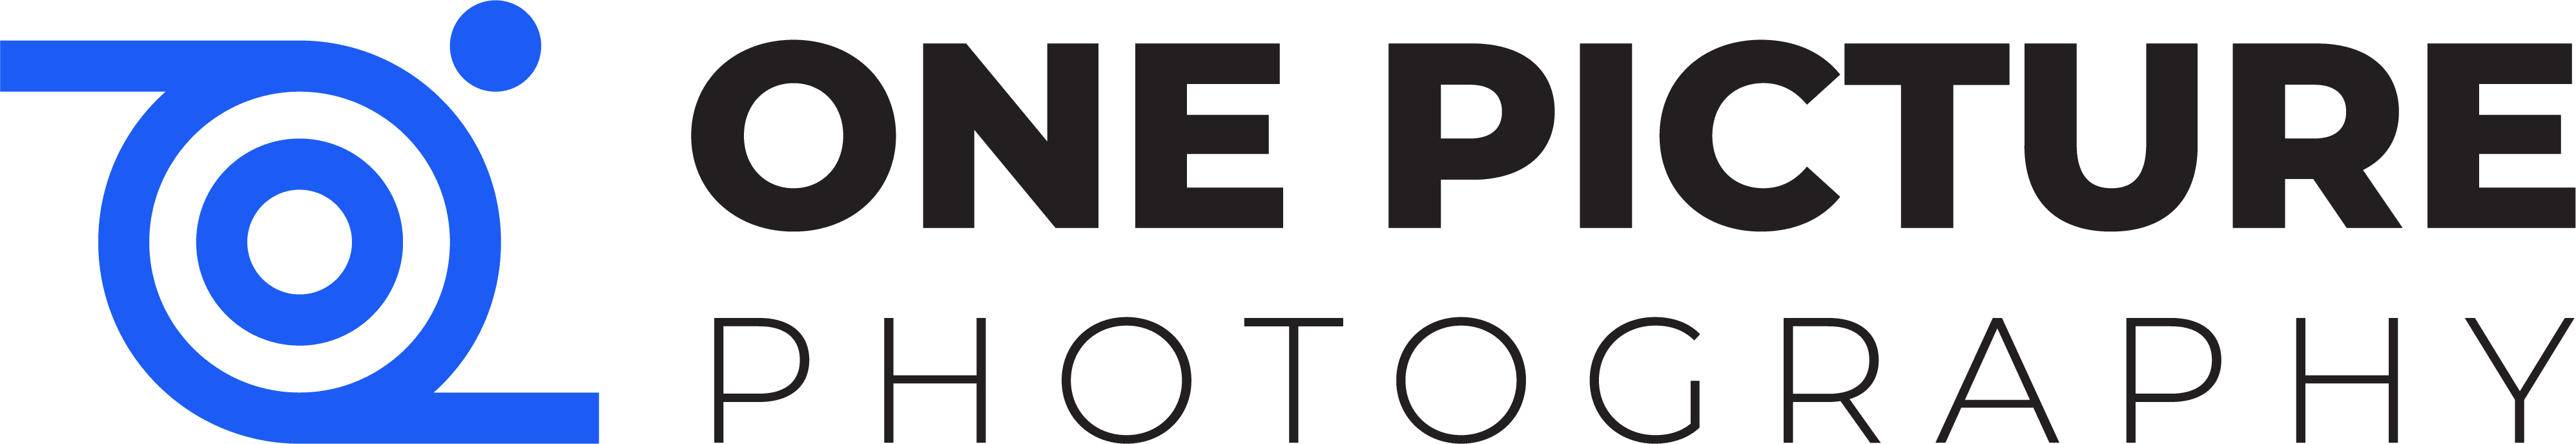 One Picture Photography primary logo which links back the home page